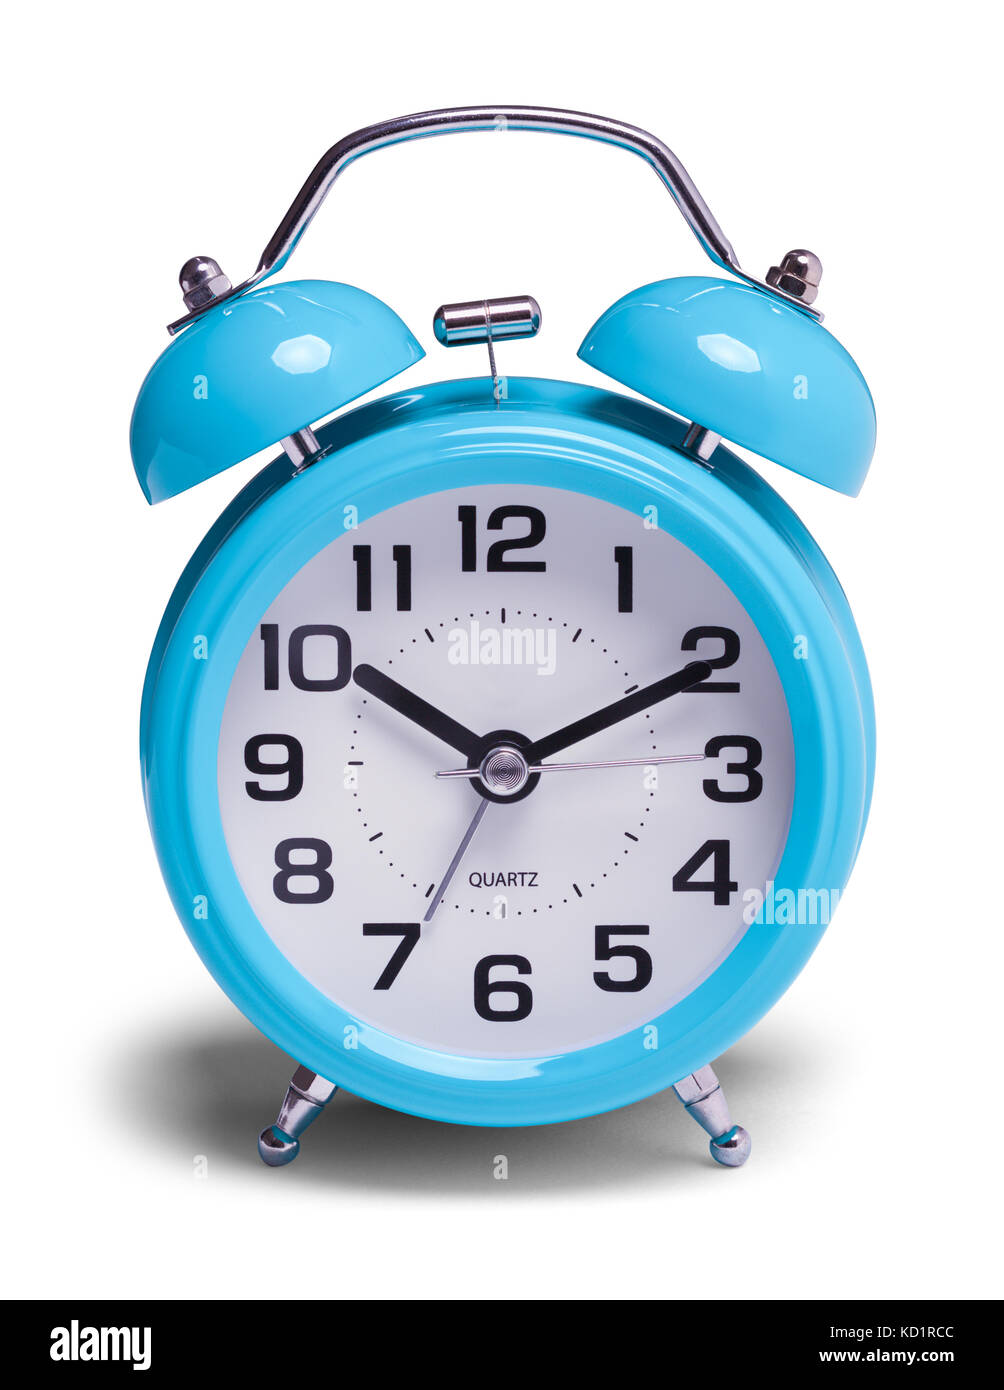 Retro Blue Alarm Clock Front View Isolated on a White Background. Stock Photo